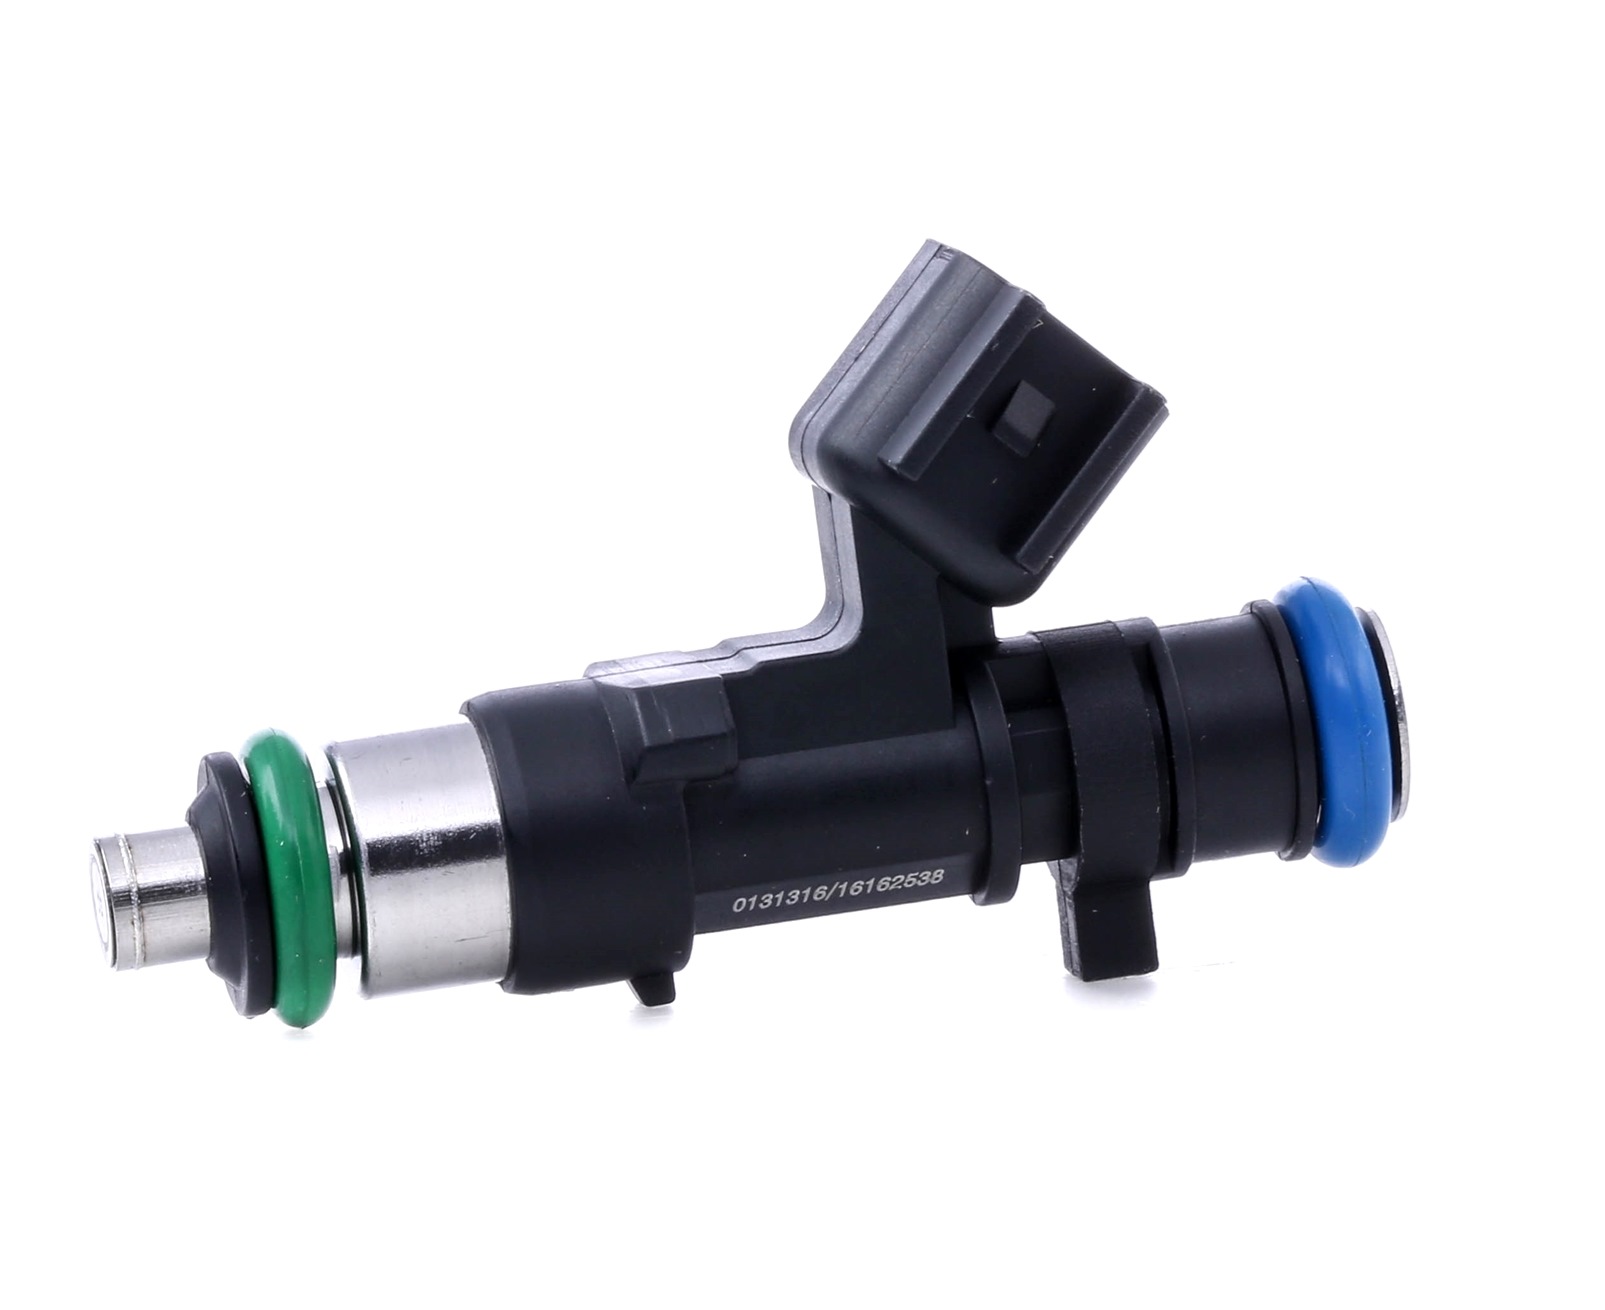 Dodge Injector Nozzle STARK SKIN-1800442 at a good price